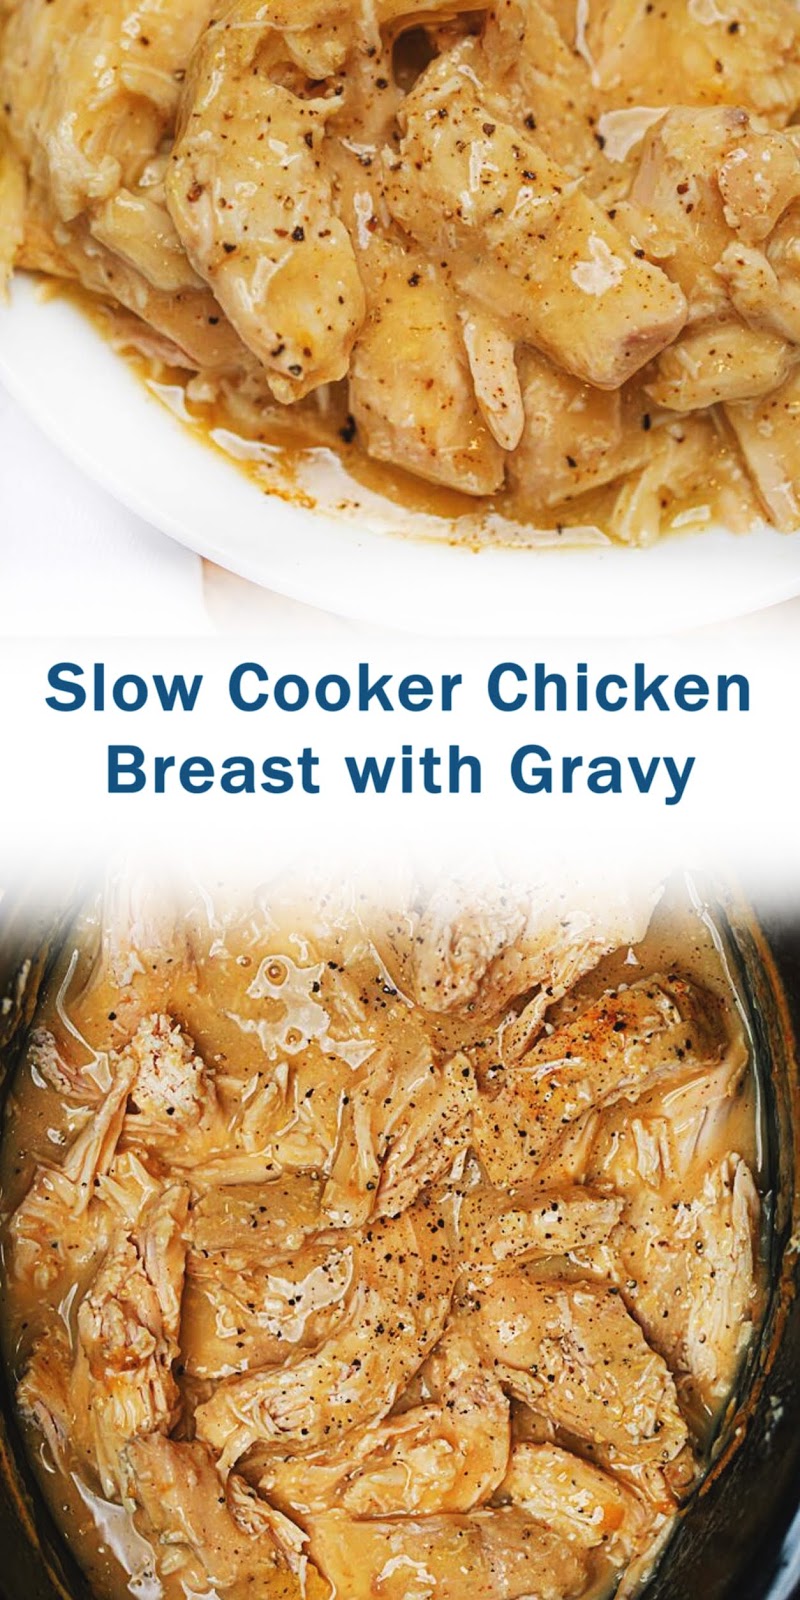 Slow Cooker Chicken Breast with Gravy - 3 SECONDS